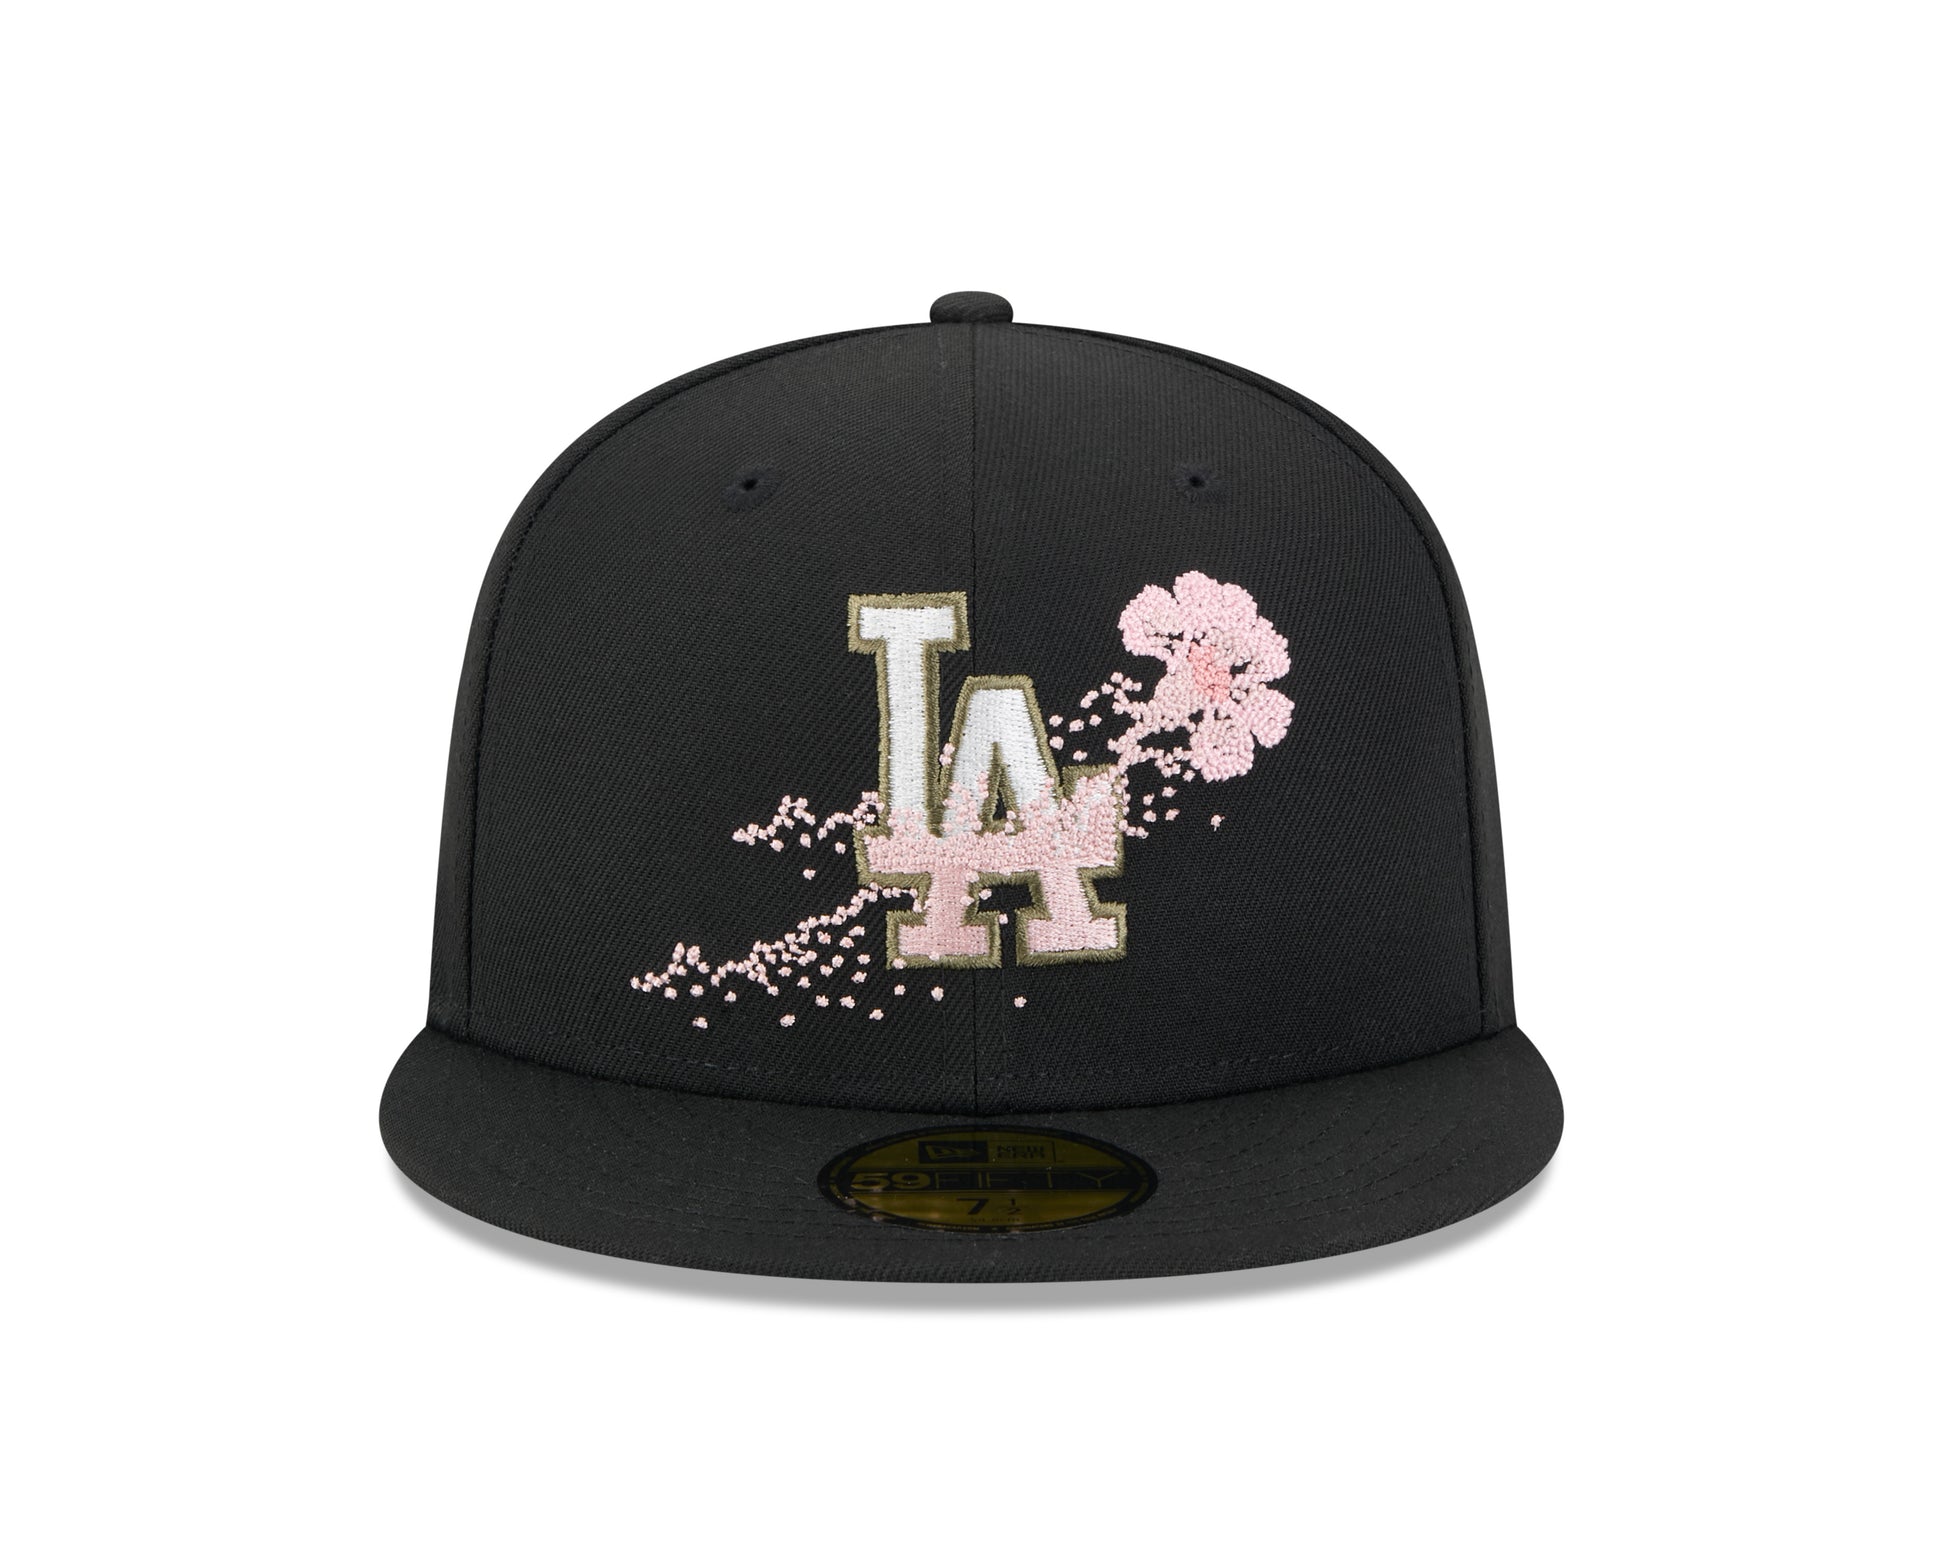 New Era - 59fifty Fitted Cap - Los Angeles Dodgers - DOTTED FLORAL - Black - Headz Up 